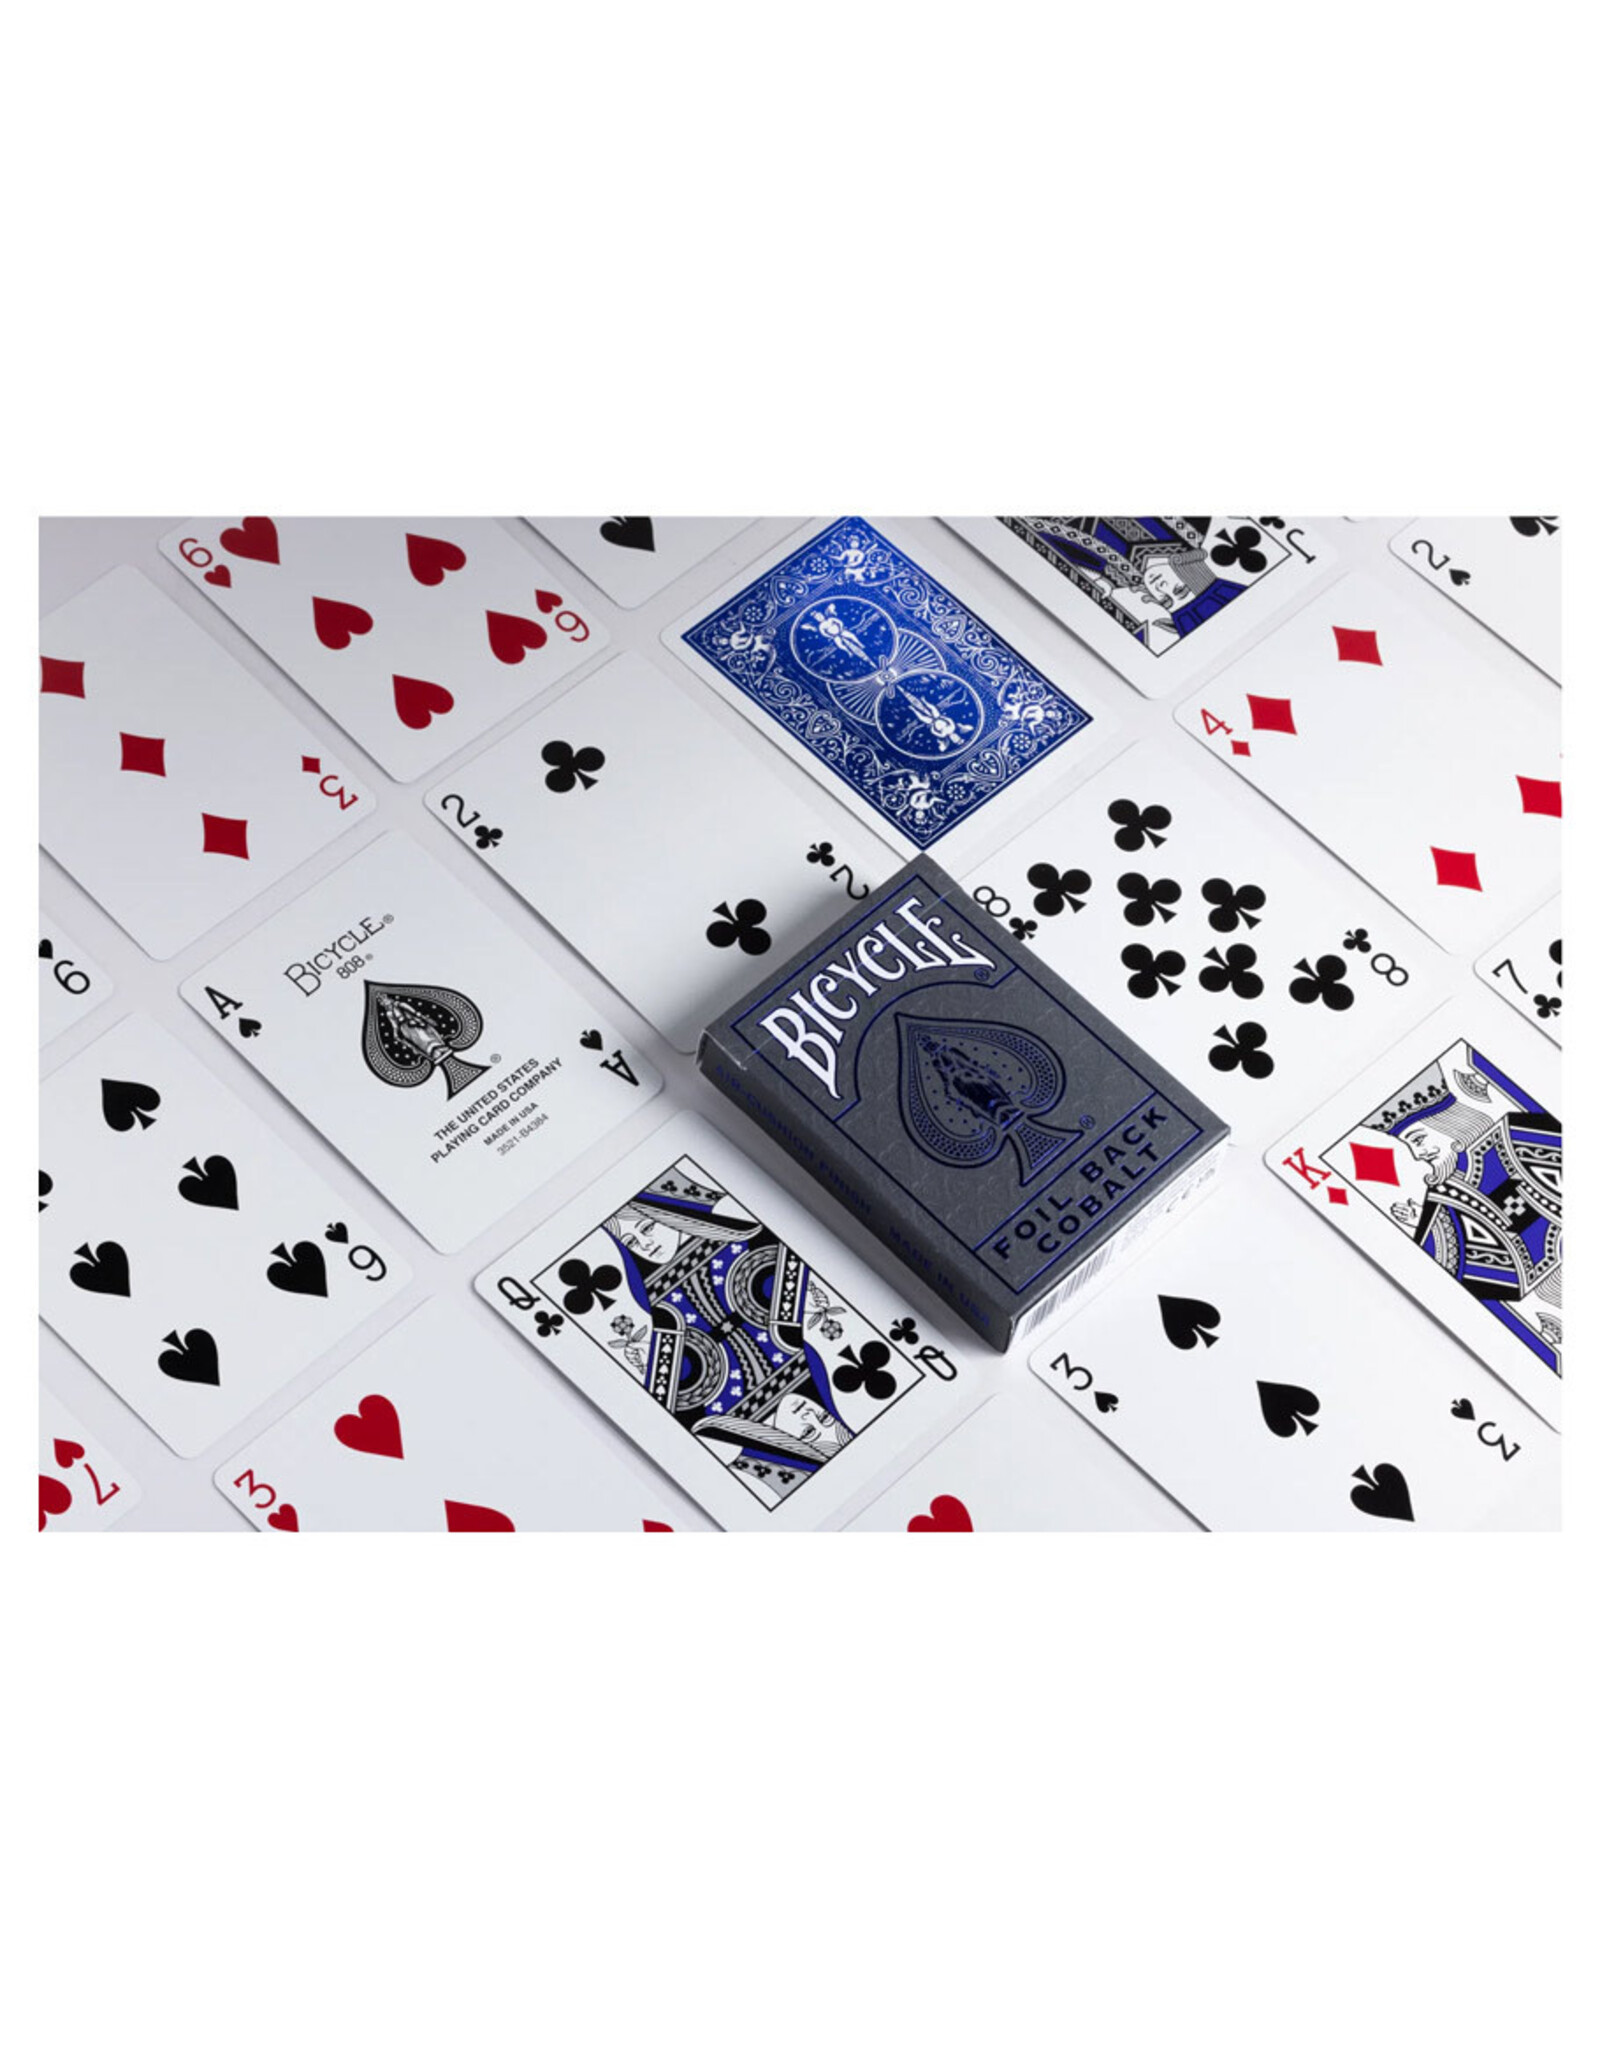 Bicycle Playing Cards: Metalluxe Blue